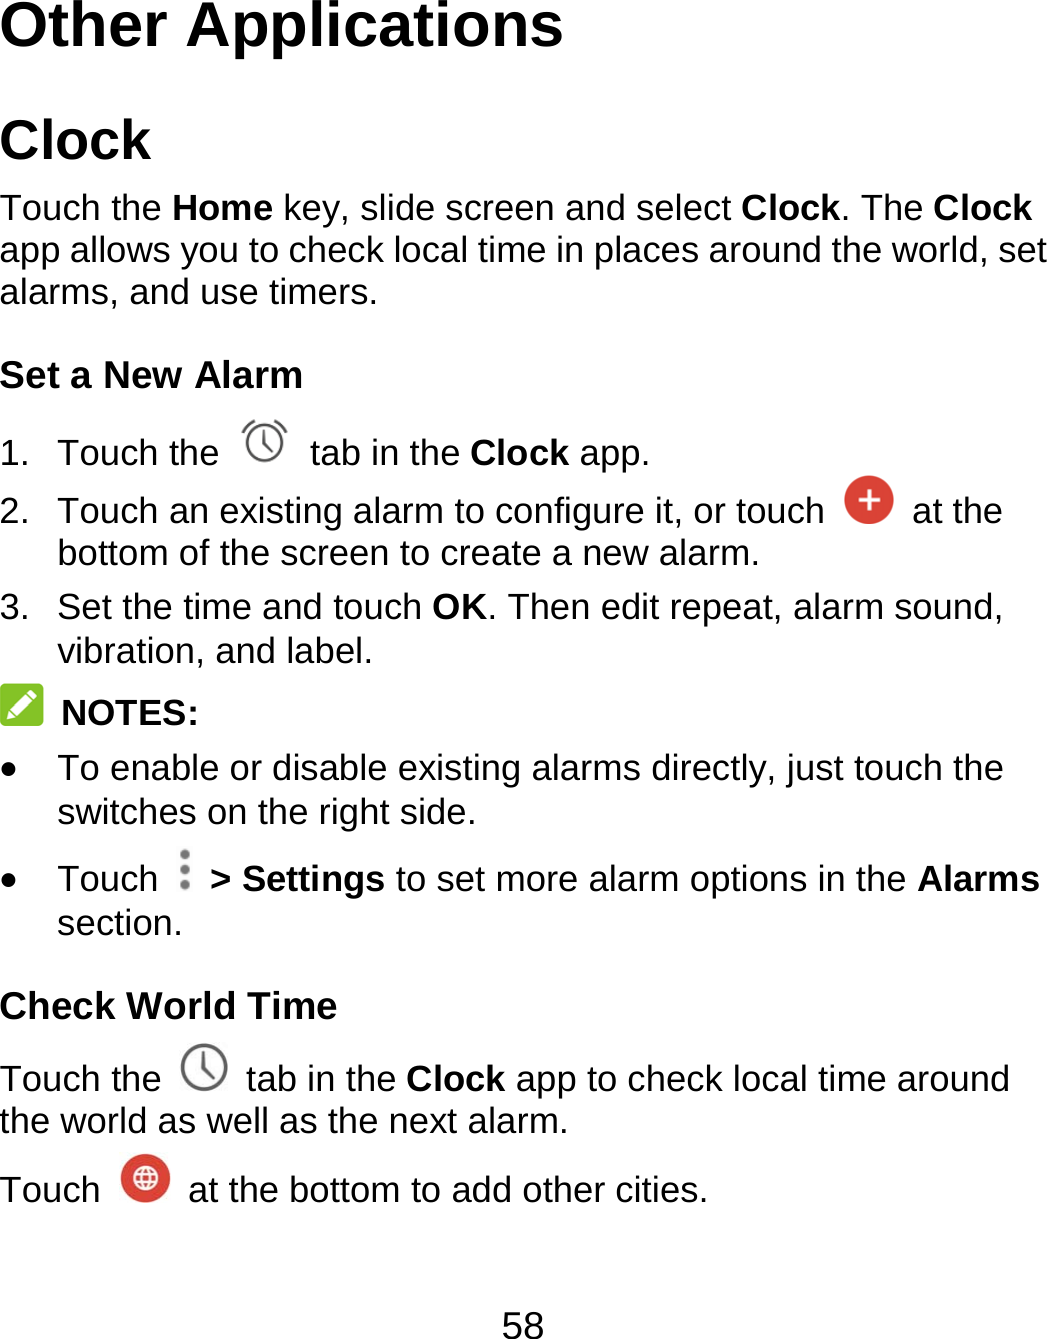 58 Other Applications Clock Touch the Home key, slide screen and select Clock. The Clock app allows you to check local time in places around the world, set alarms, and use timers. Set a New Alarm 1. Touch the   tab in the Clock app. 2.  Touch an existing alarm to configure it, or touch   at the bottom of the screen to create a new alarm. 3.  Set the time and touch OK. Then edit repeat, alarm sound, vibration, and label.  NOTES:  To enable or disable existing alarms directly, just touch the switches on the right side.  Touch   &gt; Settings to set more alarm options in the Alarms section. Check World Time Touch the   tab in the Clock app to check local time around the world as well as the next alarm. Touch    at the bottom to add other cities. 